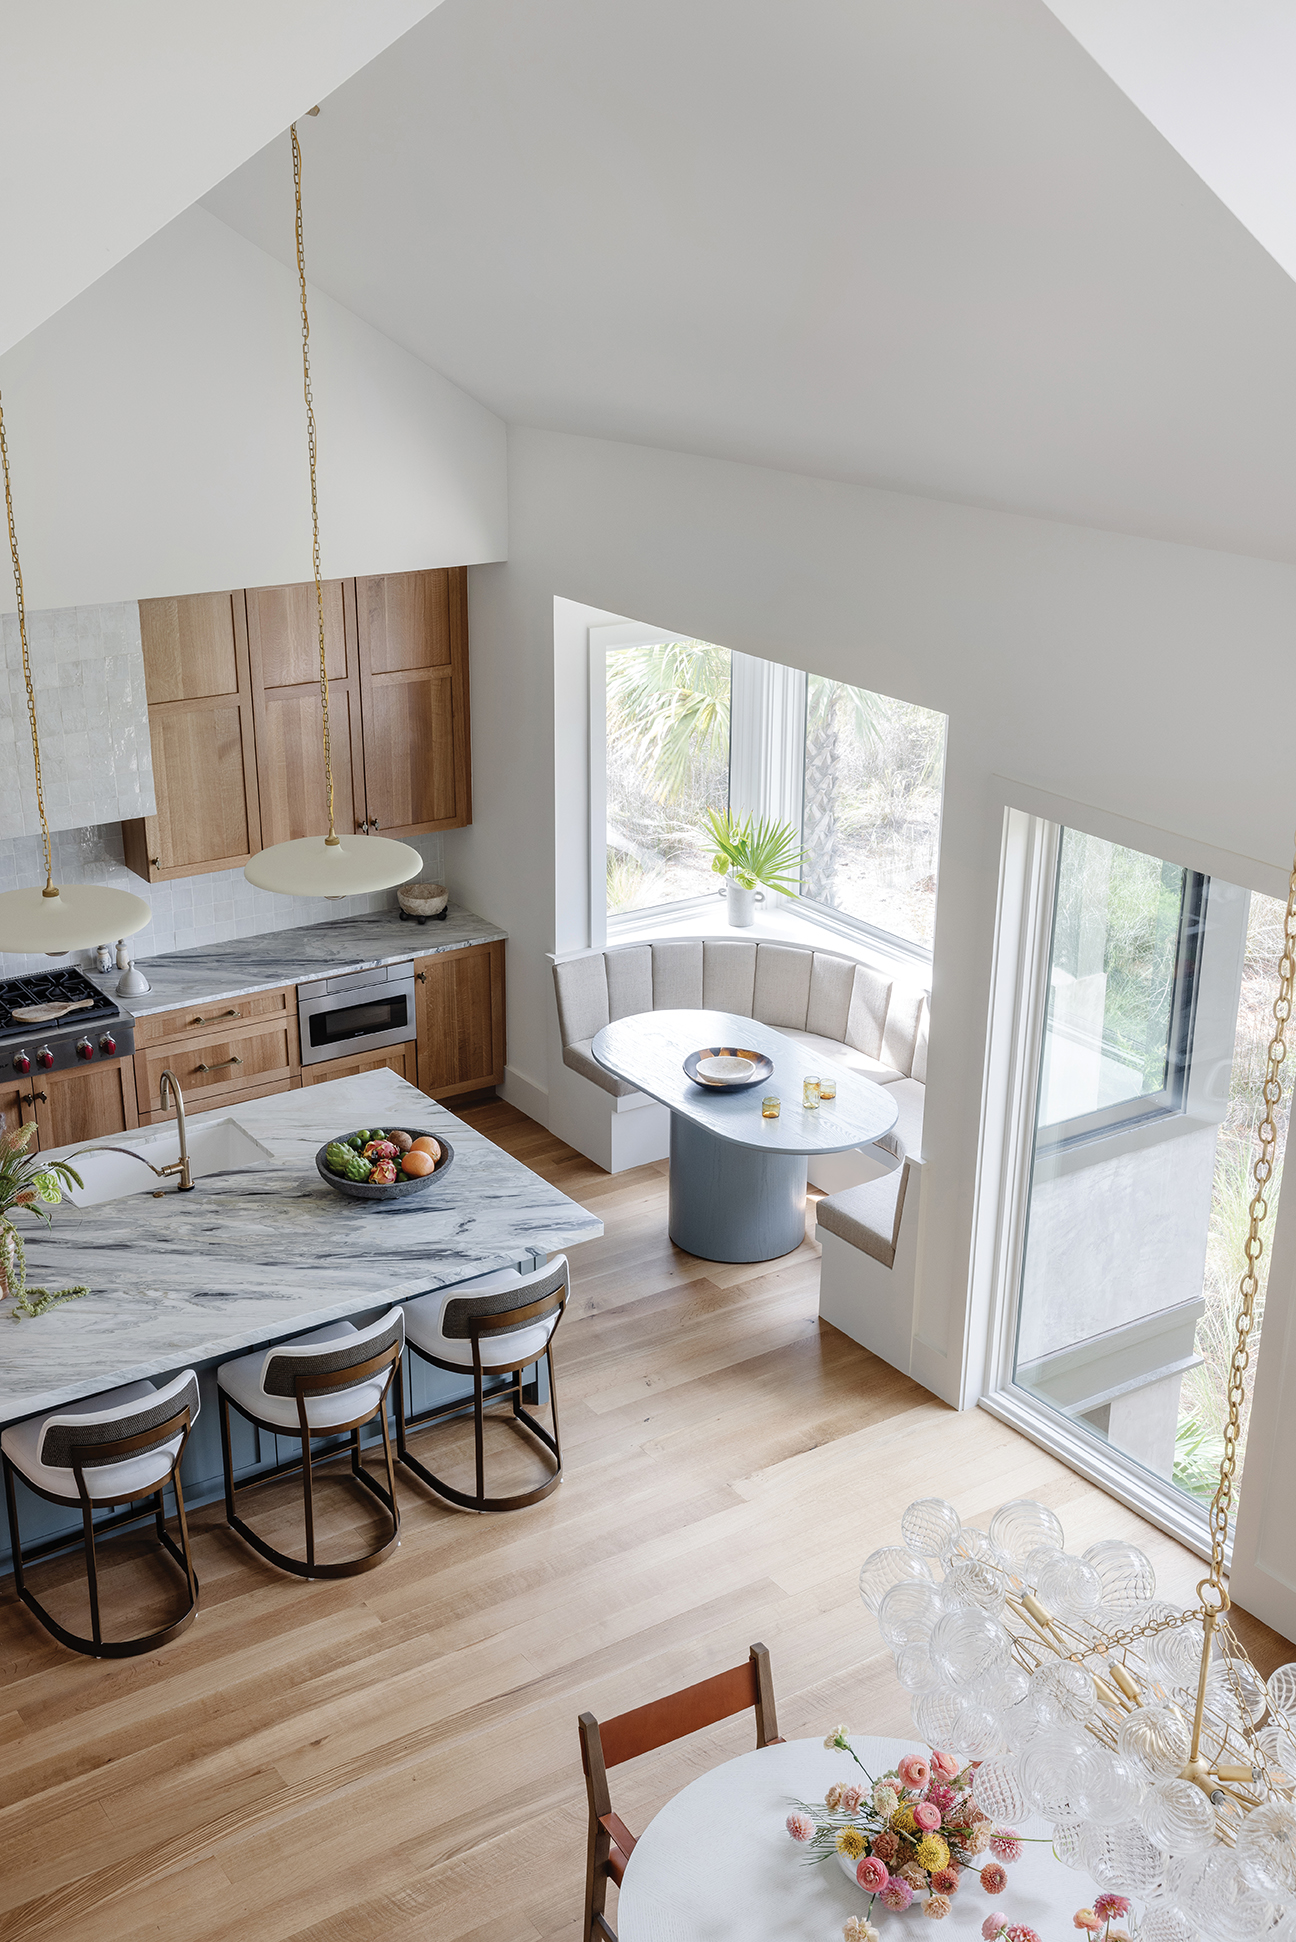 Looking down from the balcony to the kitchen/dining area is light and bright, seamlessly melding the colors of the marsh with the interior space.